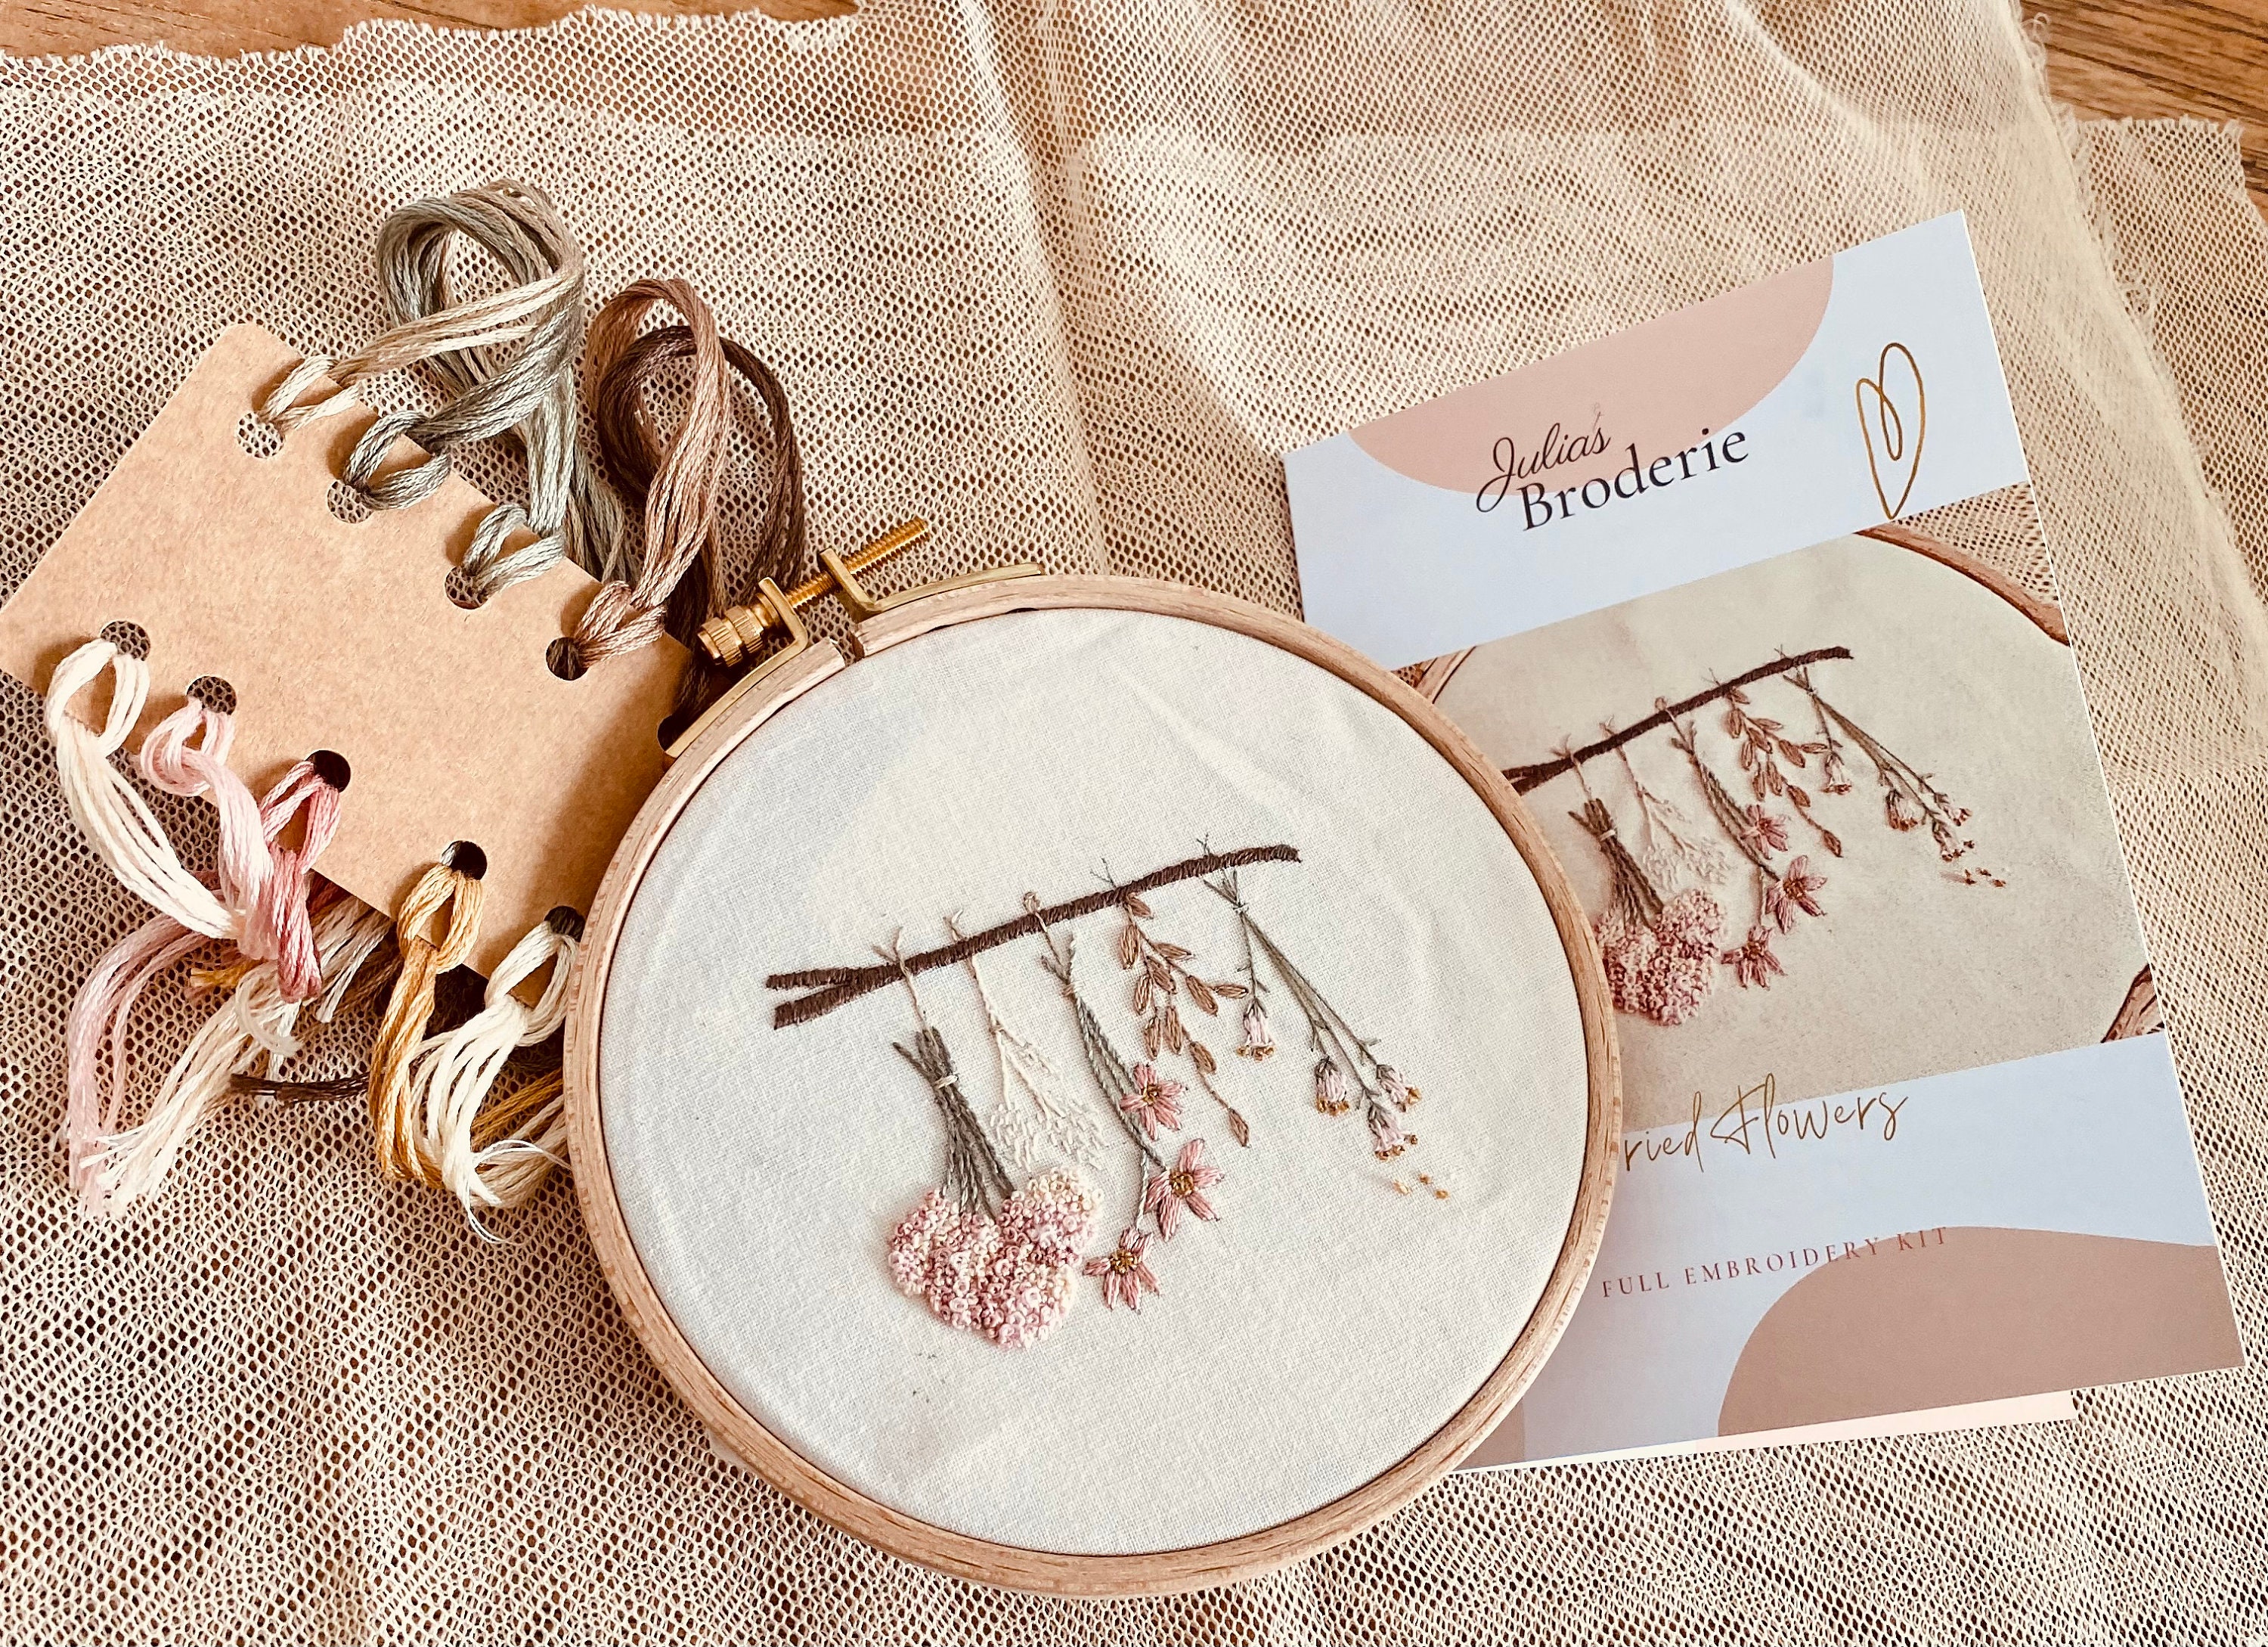 Learn to Embroider Journey Box, Beginner Embroidery Kit, DIY Embroidery 